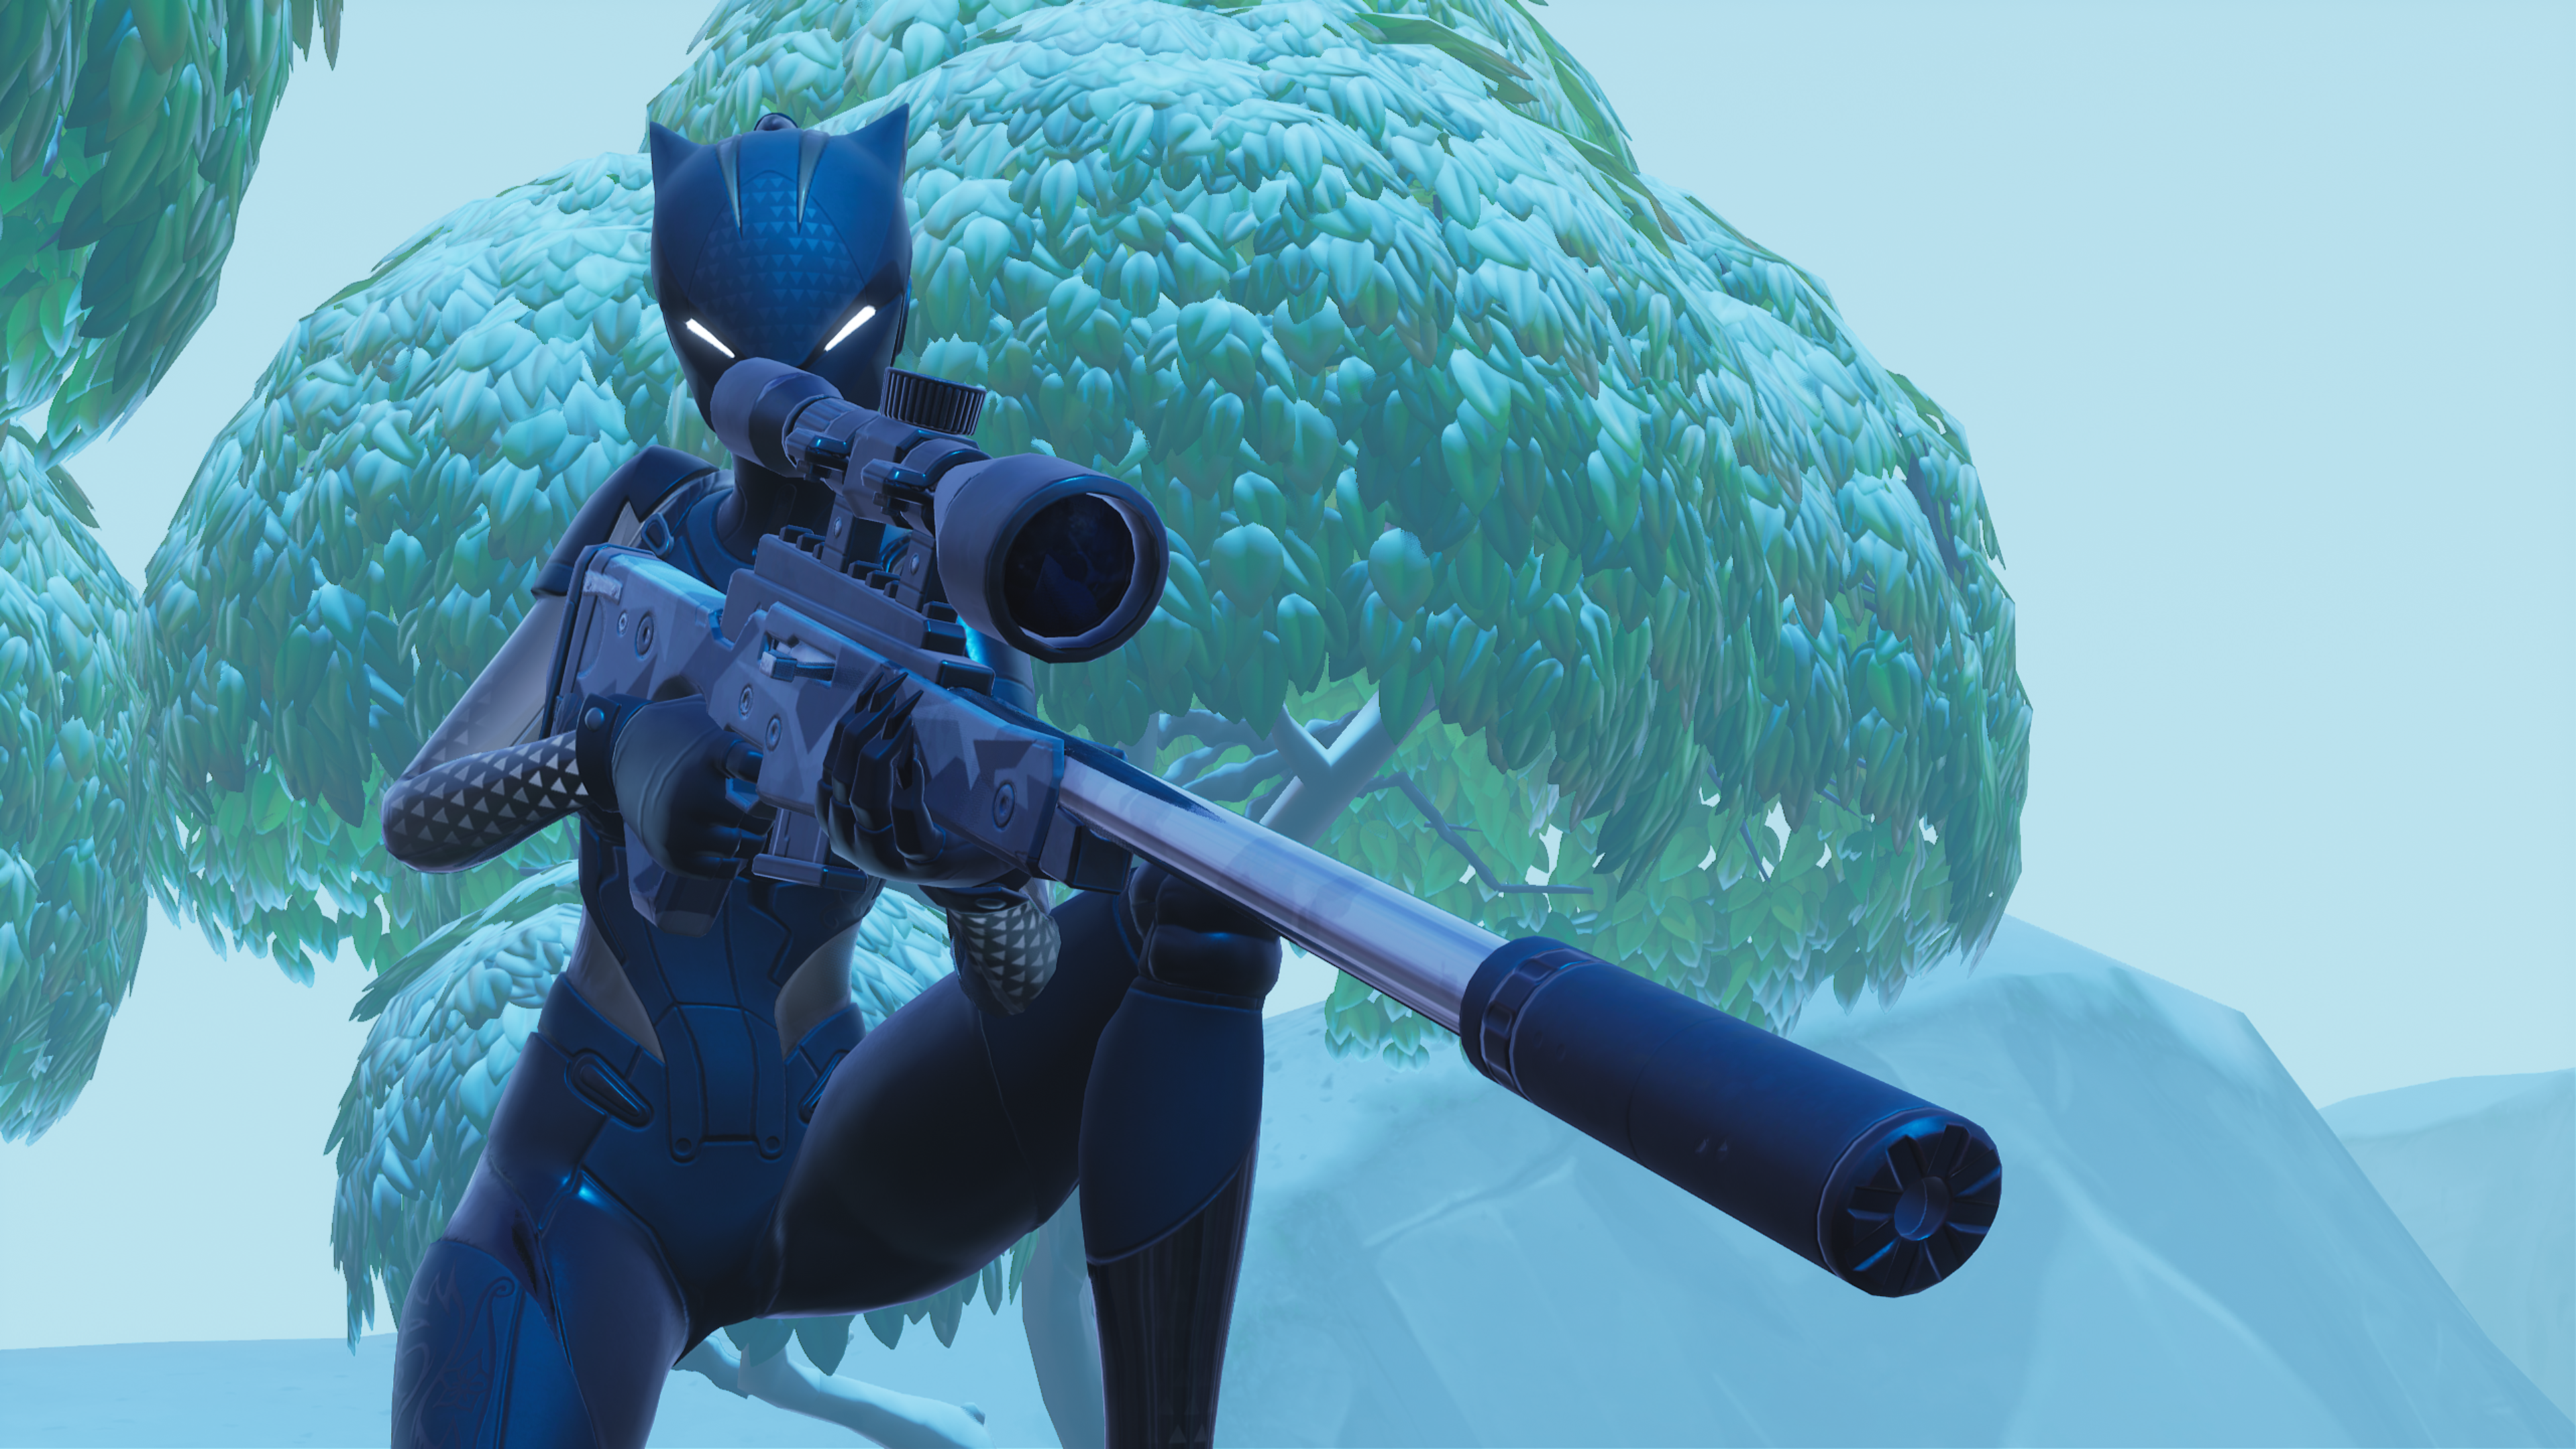 Fortnite lynx wallpaper by SSRCars  Download on ZEDGE  feb9